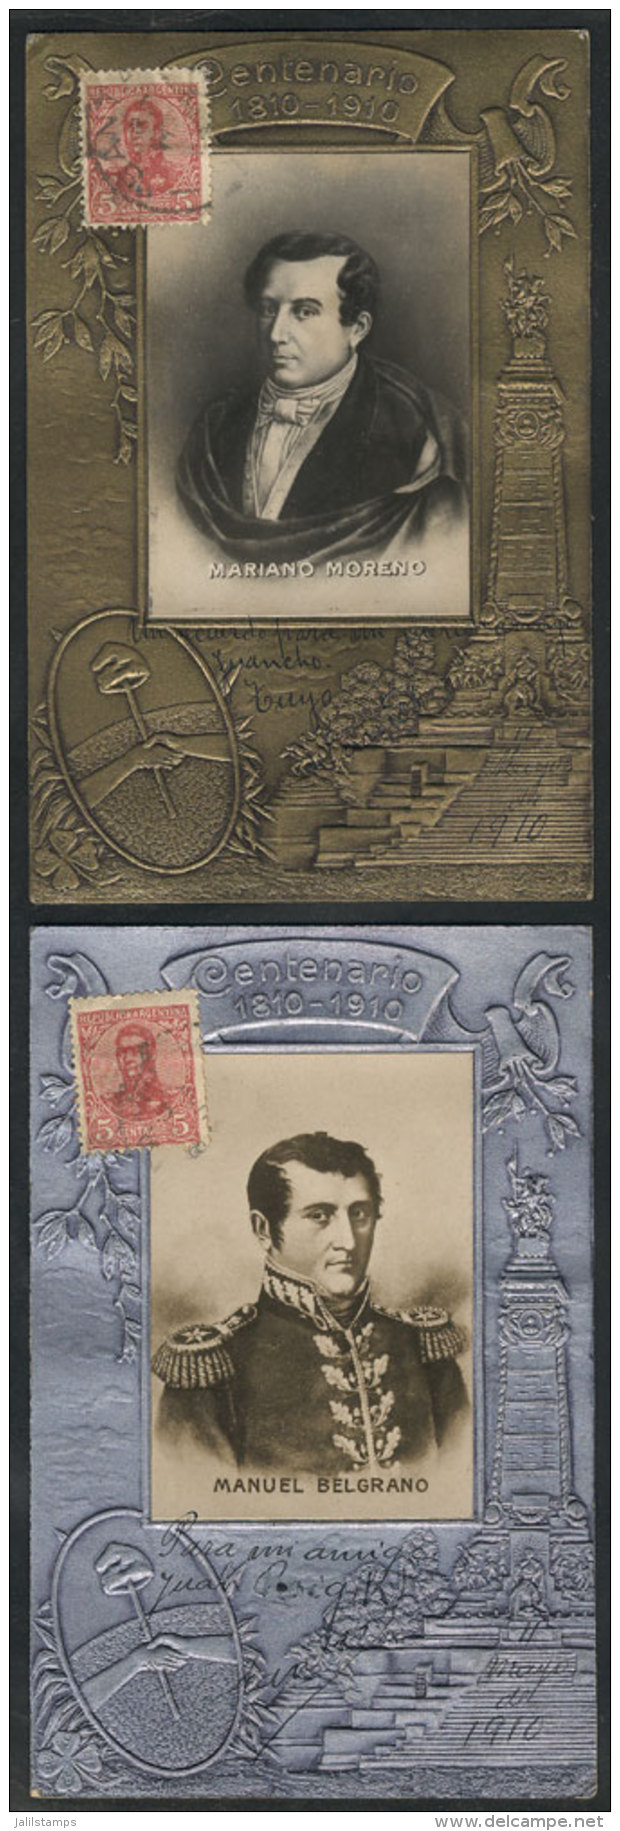 Centenary Of 1810: 2 Rare PCs With Views Of Mariano Moreno And Manuel Belgrano With Embossed Details, VF Quality,... - Argentine